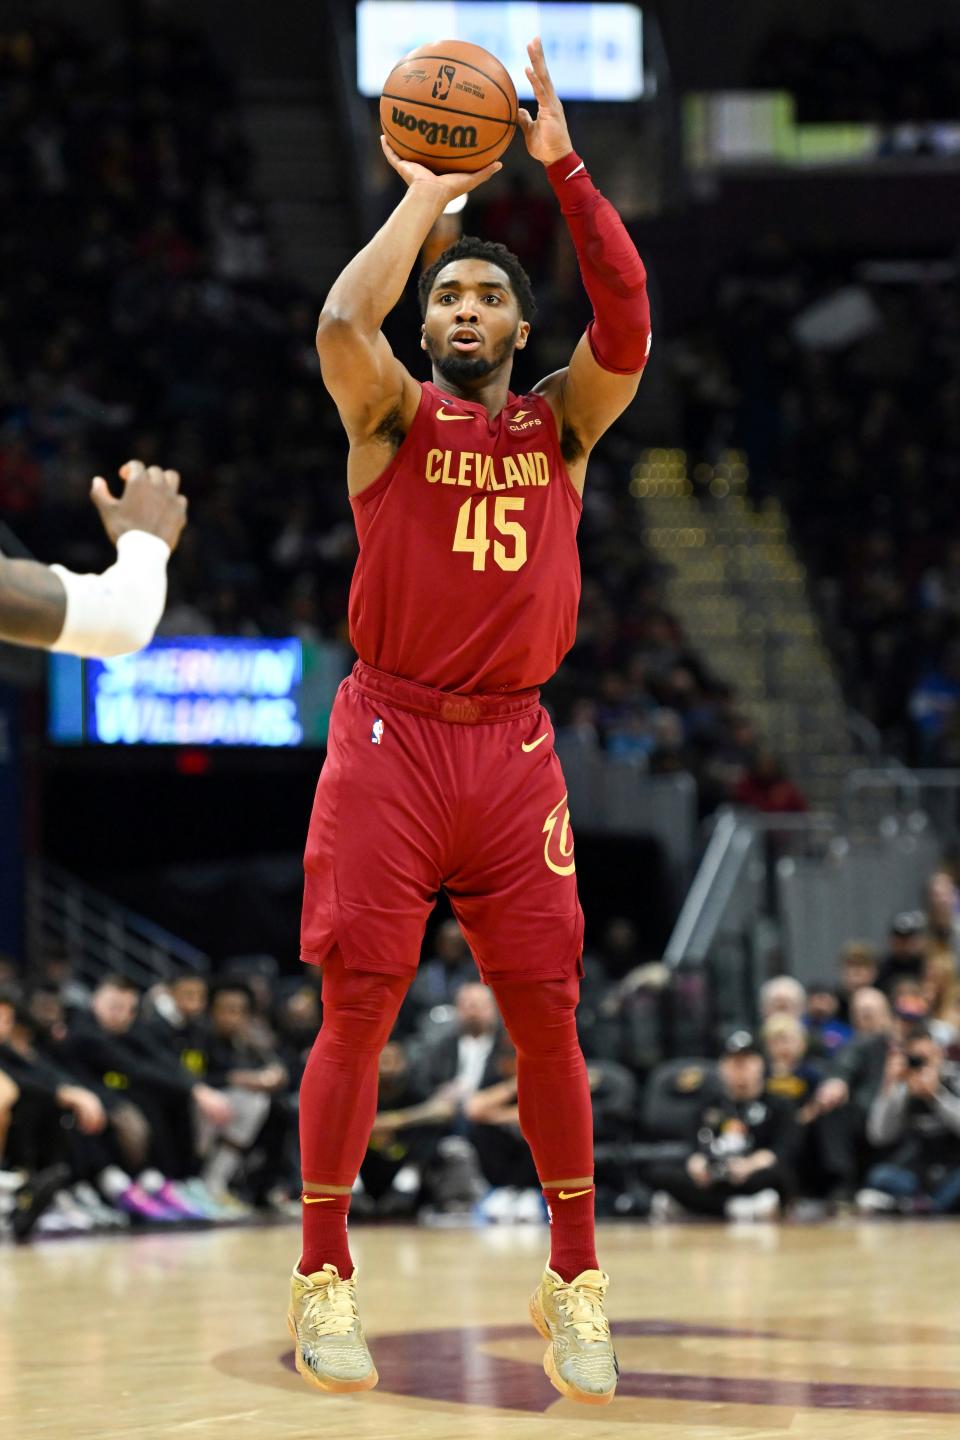 Cleveland Cavaliers guard Donovan Mitchell shoots a 3-point basket during the second half of an NBA basketball game against the Utah Jazz, Monday, Dec. 19, 2022, in Cleveland. (AP Photo/Nick Cammett)